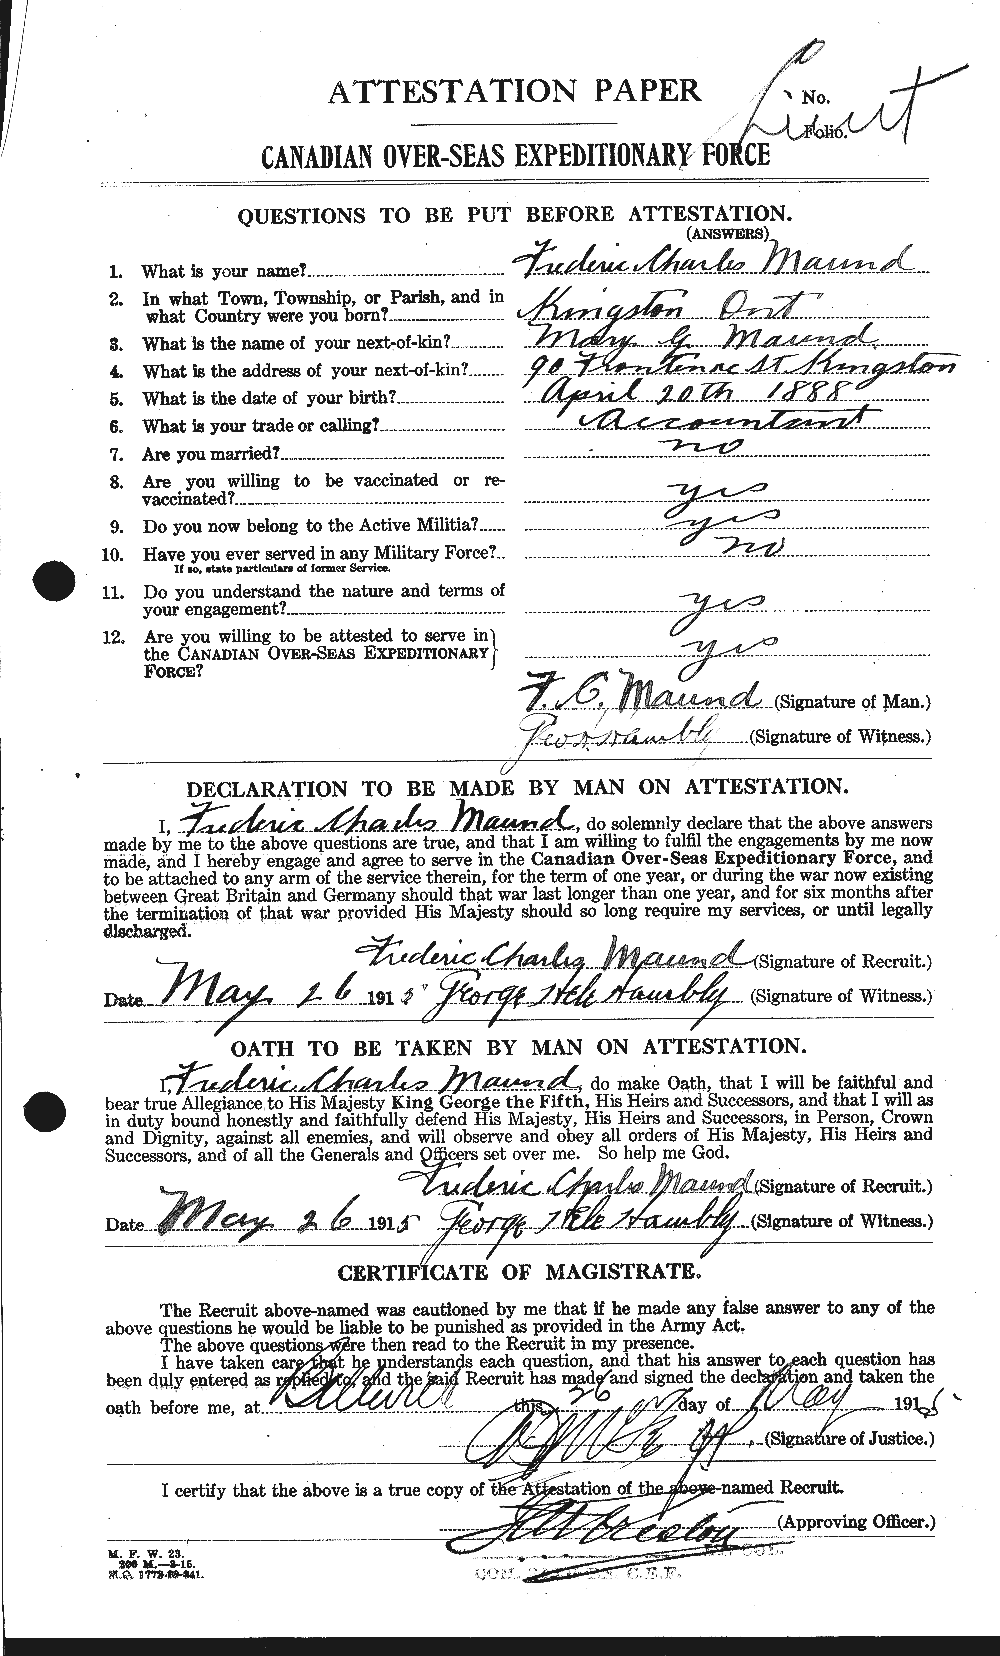 Personnel Records of the First World War - CEF 487792a